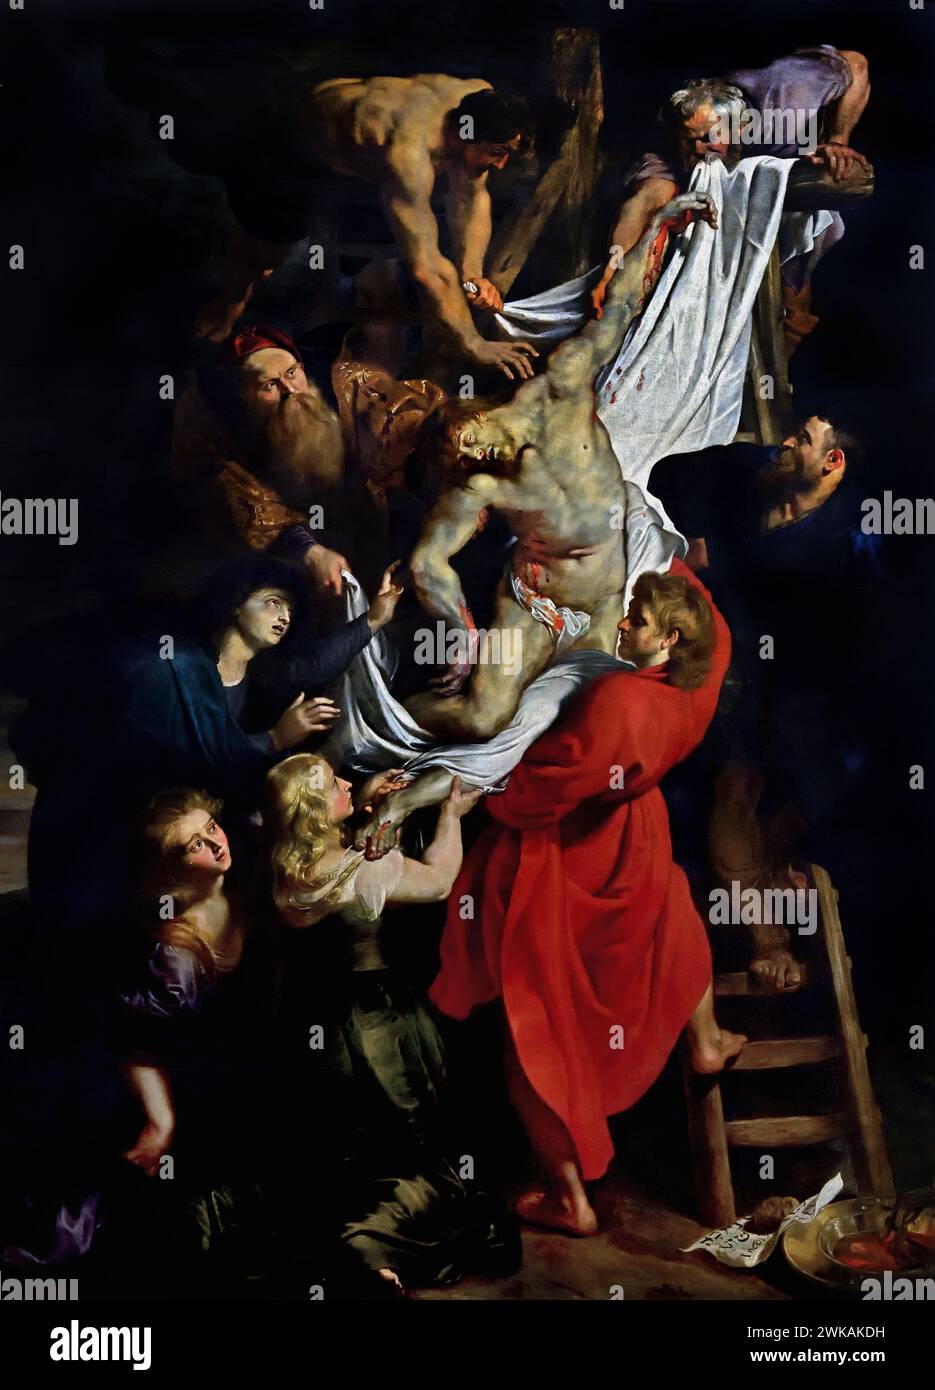 The Descent from the Cross; the central panel of a triptych painting by Peter Paul Rubens (1577 - 1640) 1611-1614 The Cathedral of Our Lady - Onze-Lieve-Vrouwekathedraal, ) Antwerp, Belgium, Belgian . ( 1352 construction ended in 1521) Gothic . ( The tragic moment when Jesus is taken from the cross and carried by a crowd of followers. ) Stock Photo